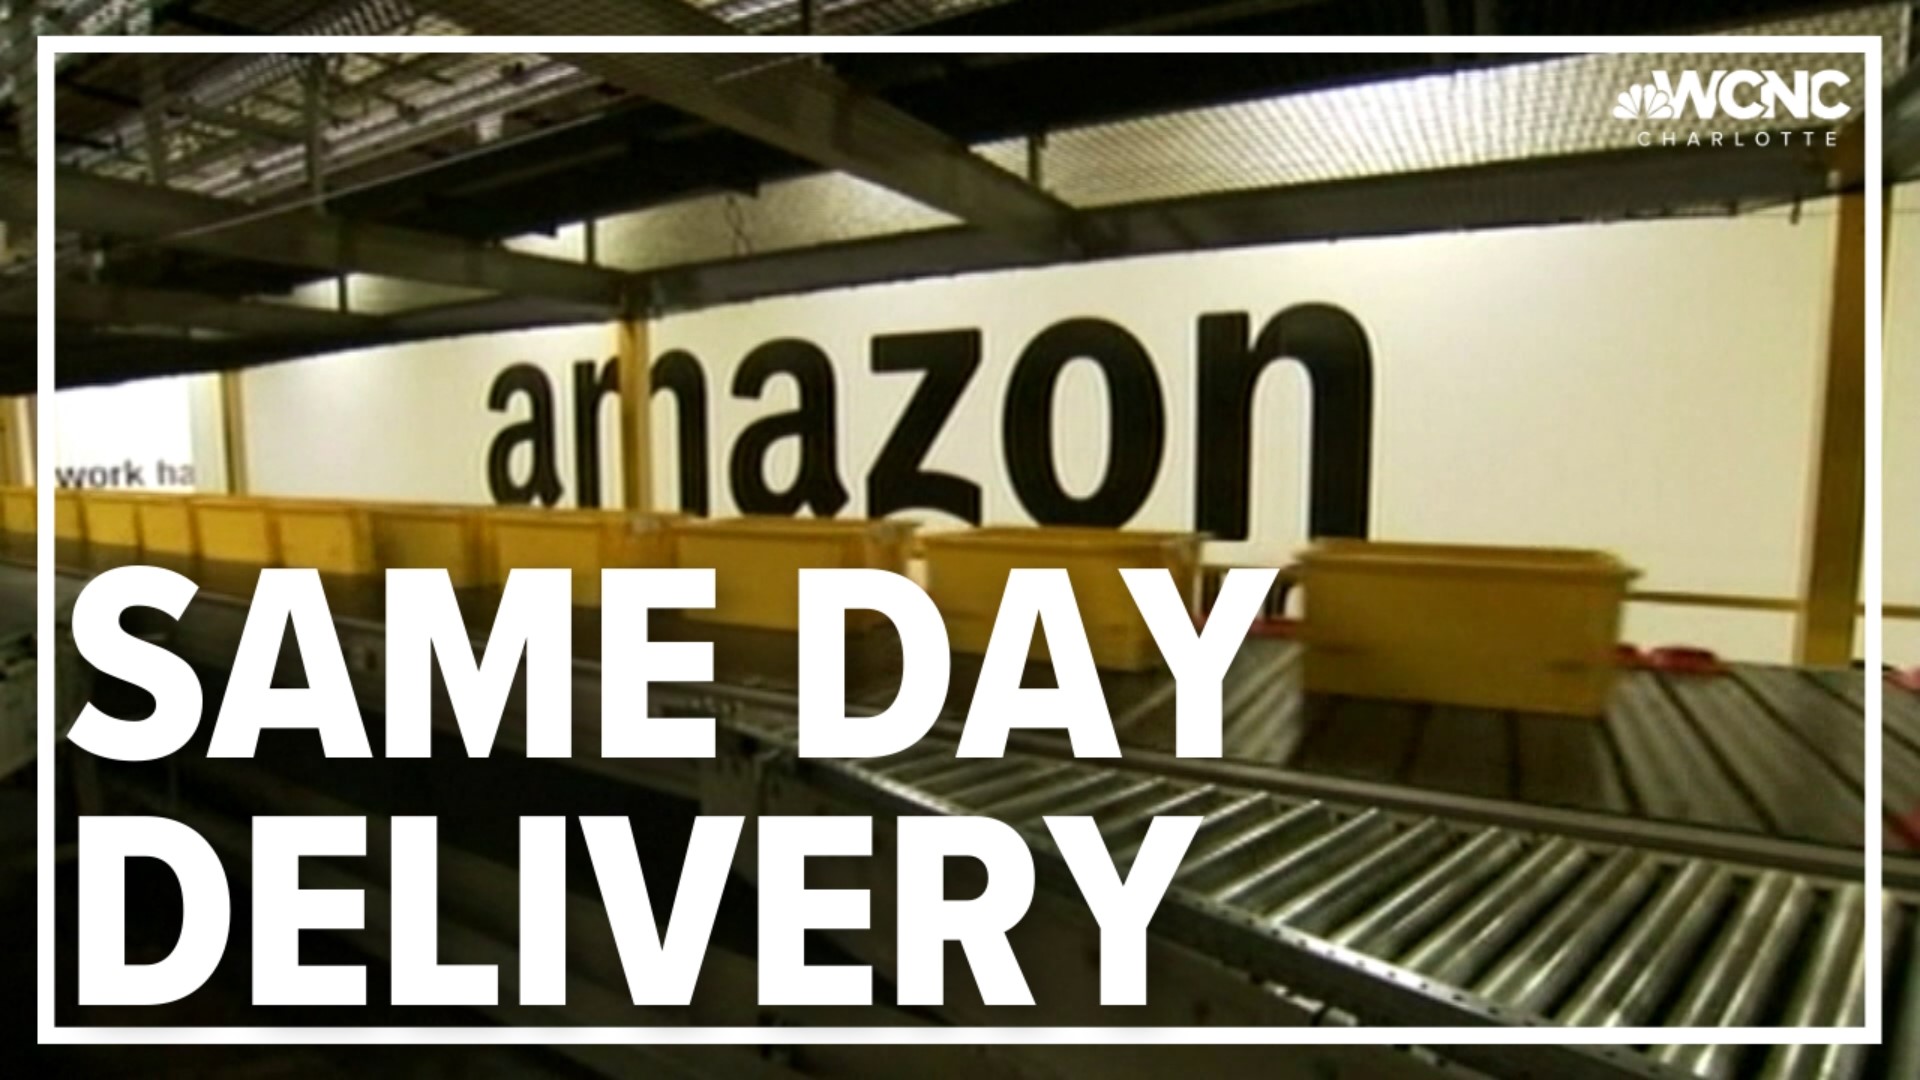 If you need your item in a hurry, here's some good news. Amazon's same-day delivery is expanding to more U.S. markets.